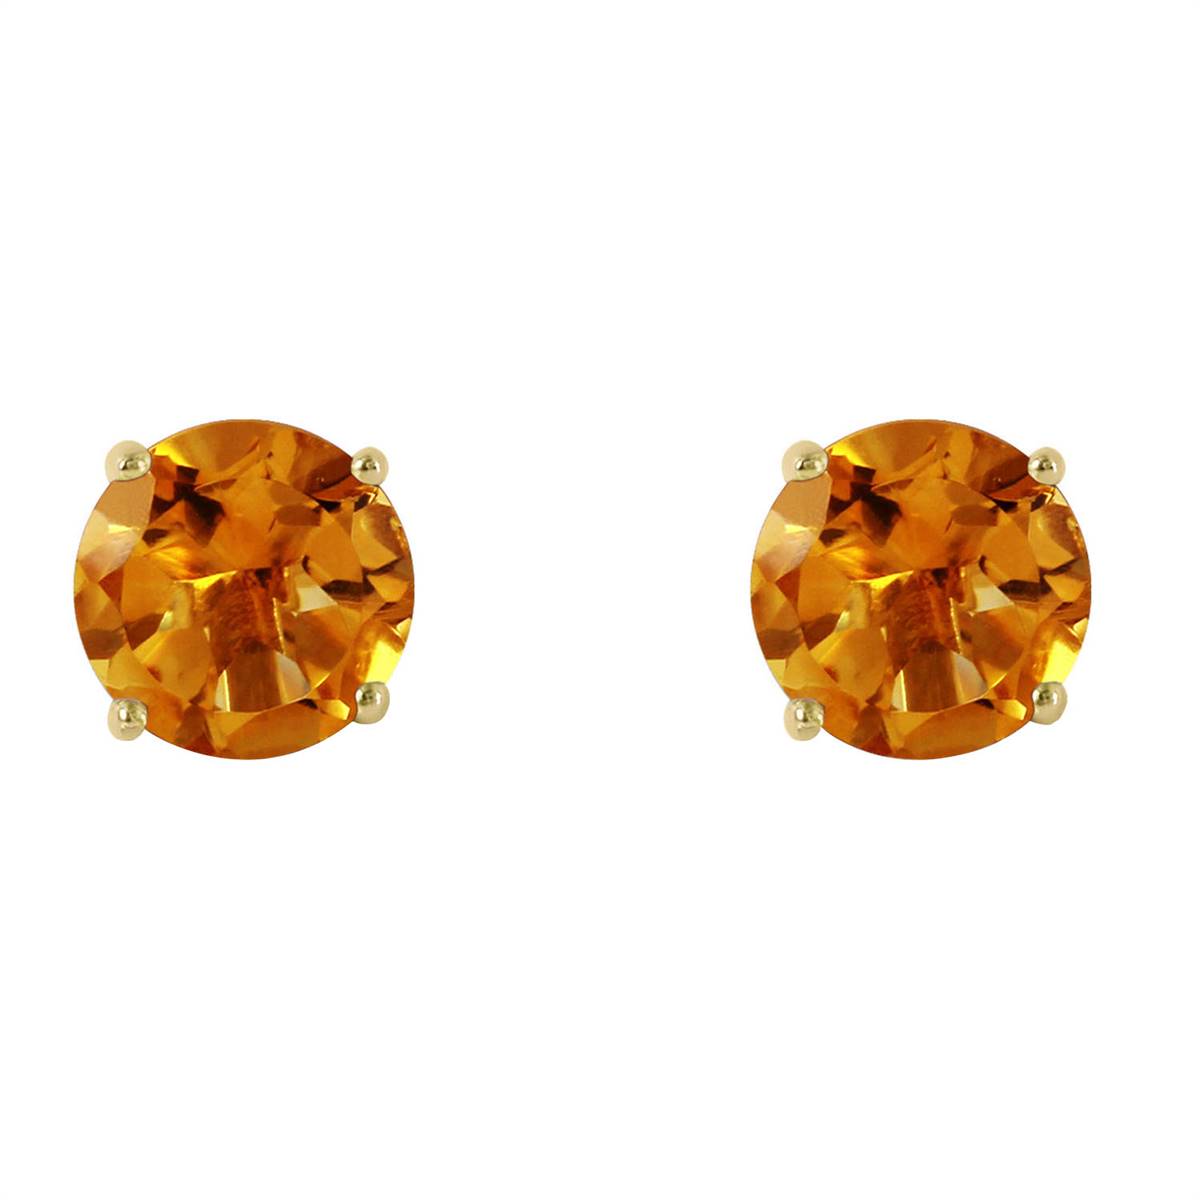 3.1 Carat 14K Solid Yellow Gold I Saw The Sun Citrine Earrings